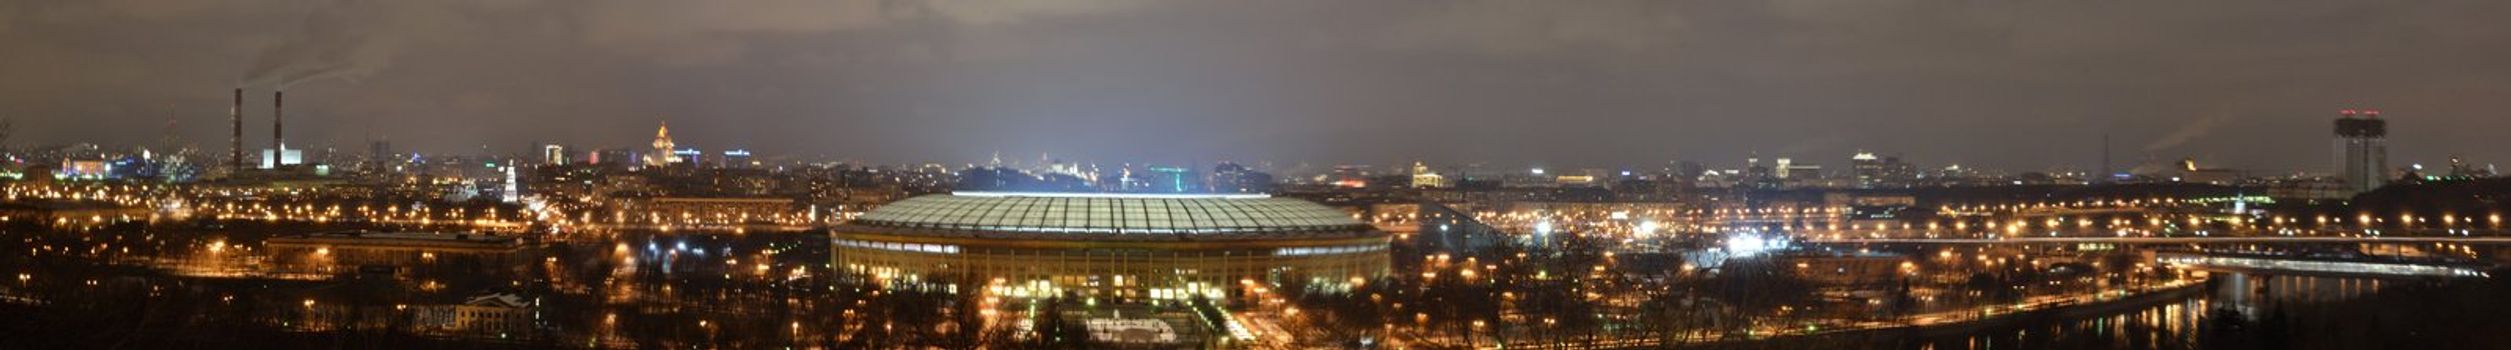 Panoramic night view of the Luzhniki Olympic Complex in Moscow